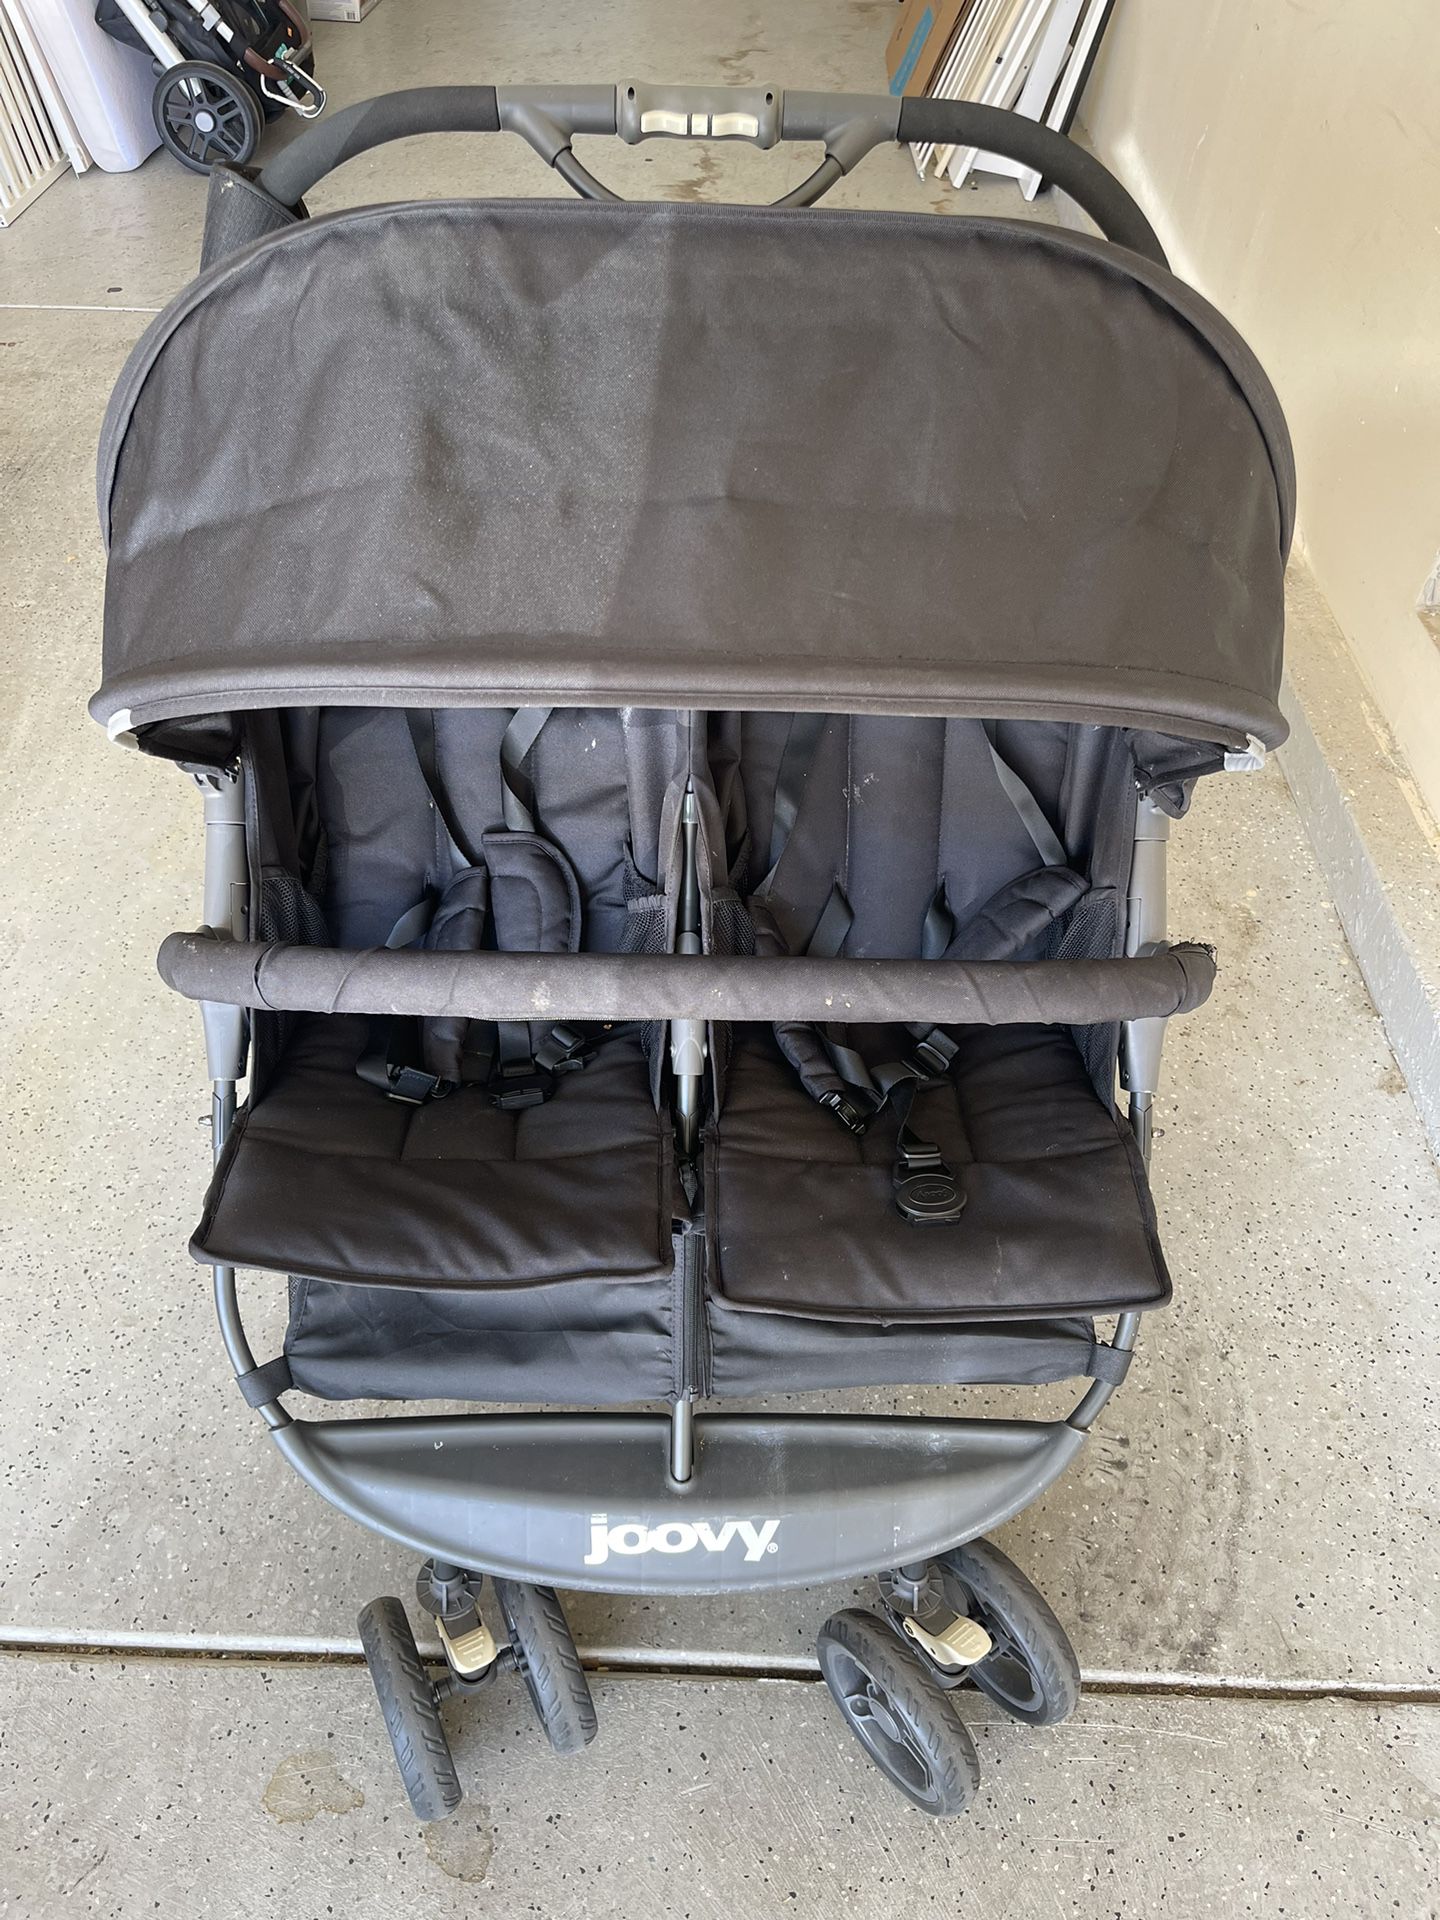 Joovy Scooter X2 with Bumper Bar, Double Stroller, Side by Side Stroller, Stroller for Twins, Large Storage Basket, Black In Color. 